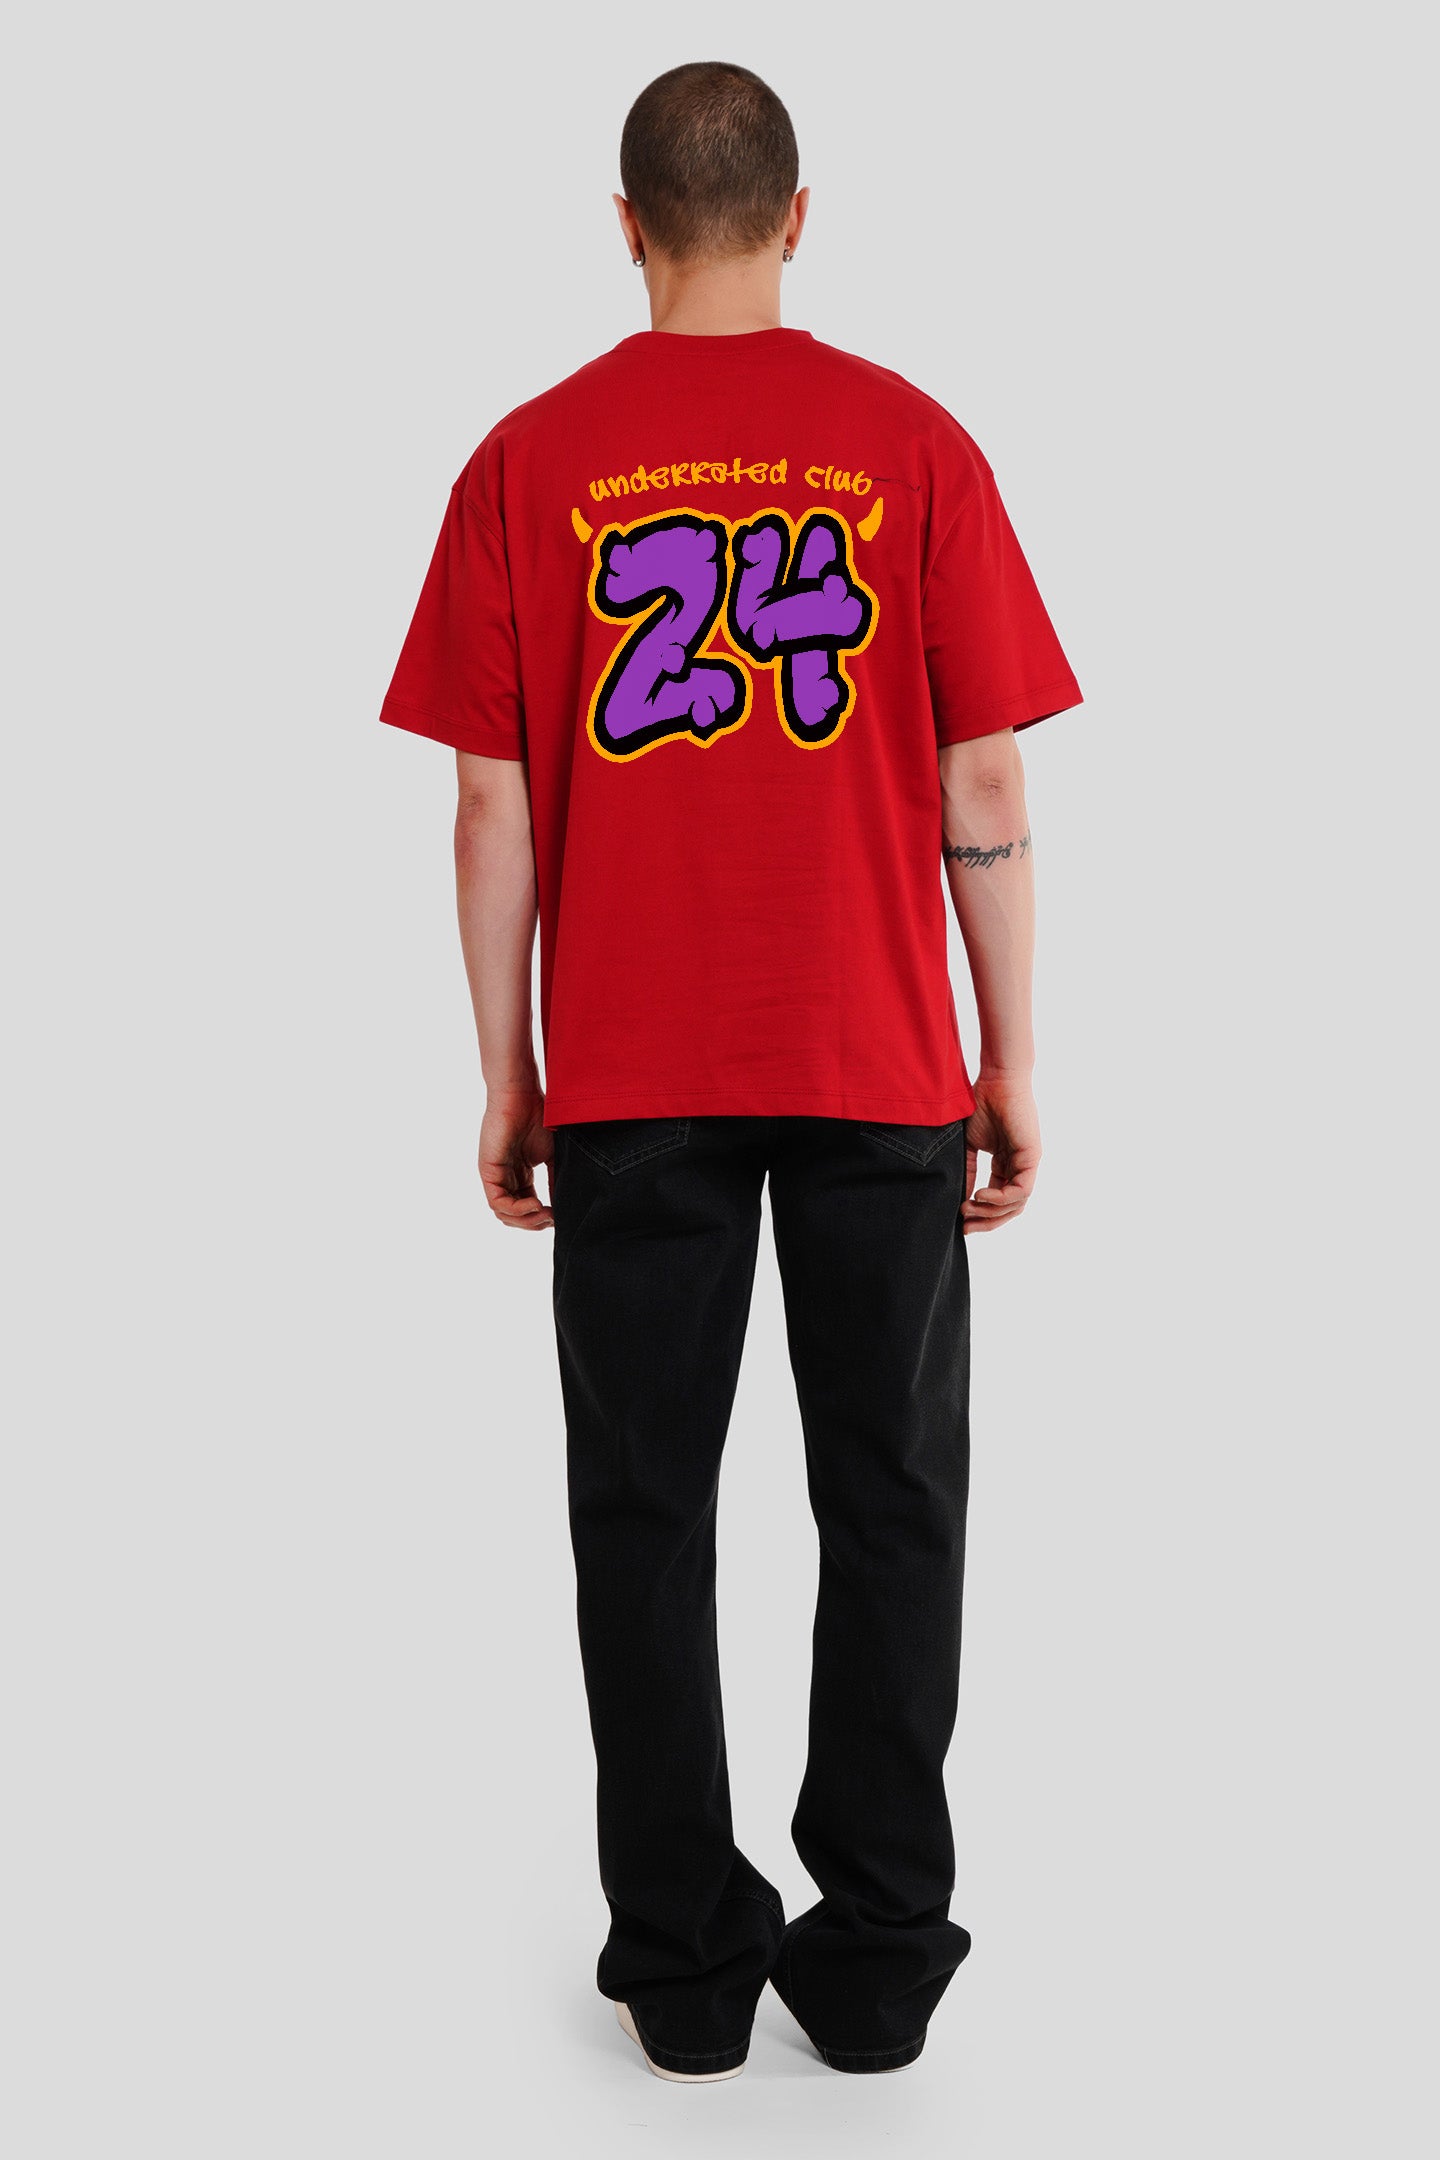 24 Red Printed T Shirt Men Oversized Fit With Front And Back Design Pic 2